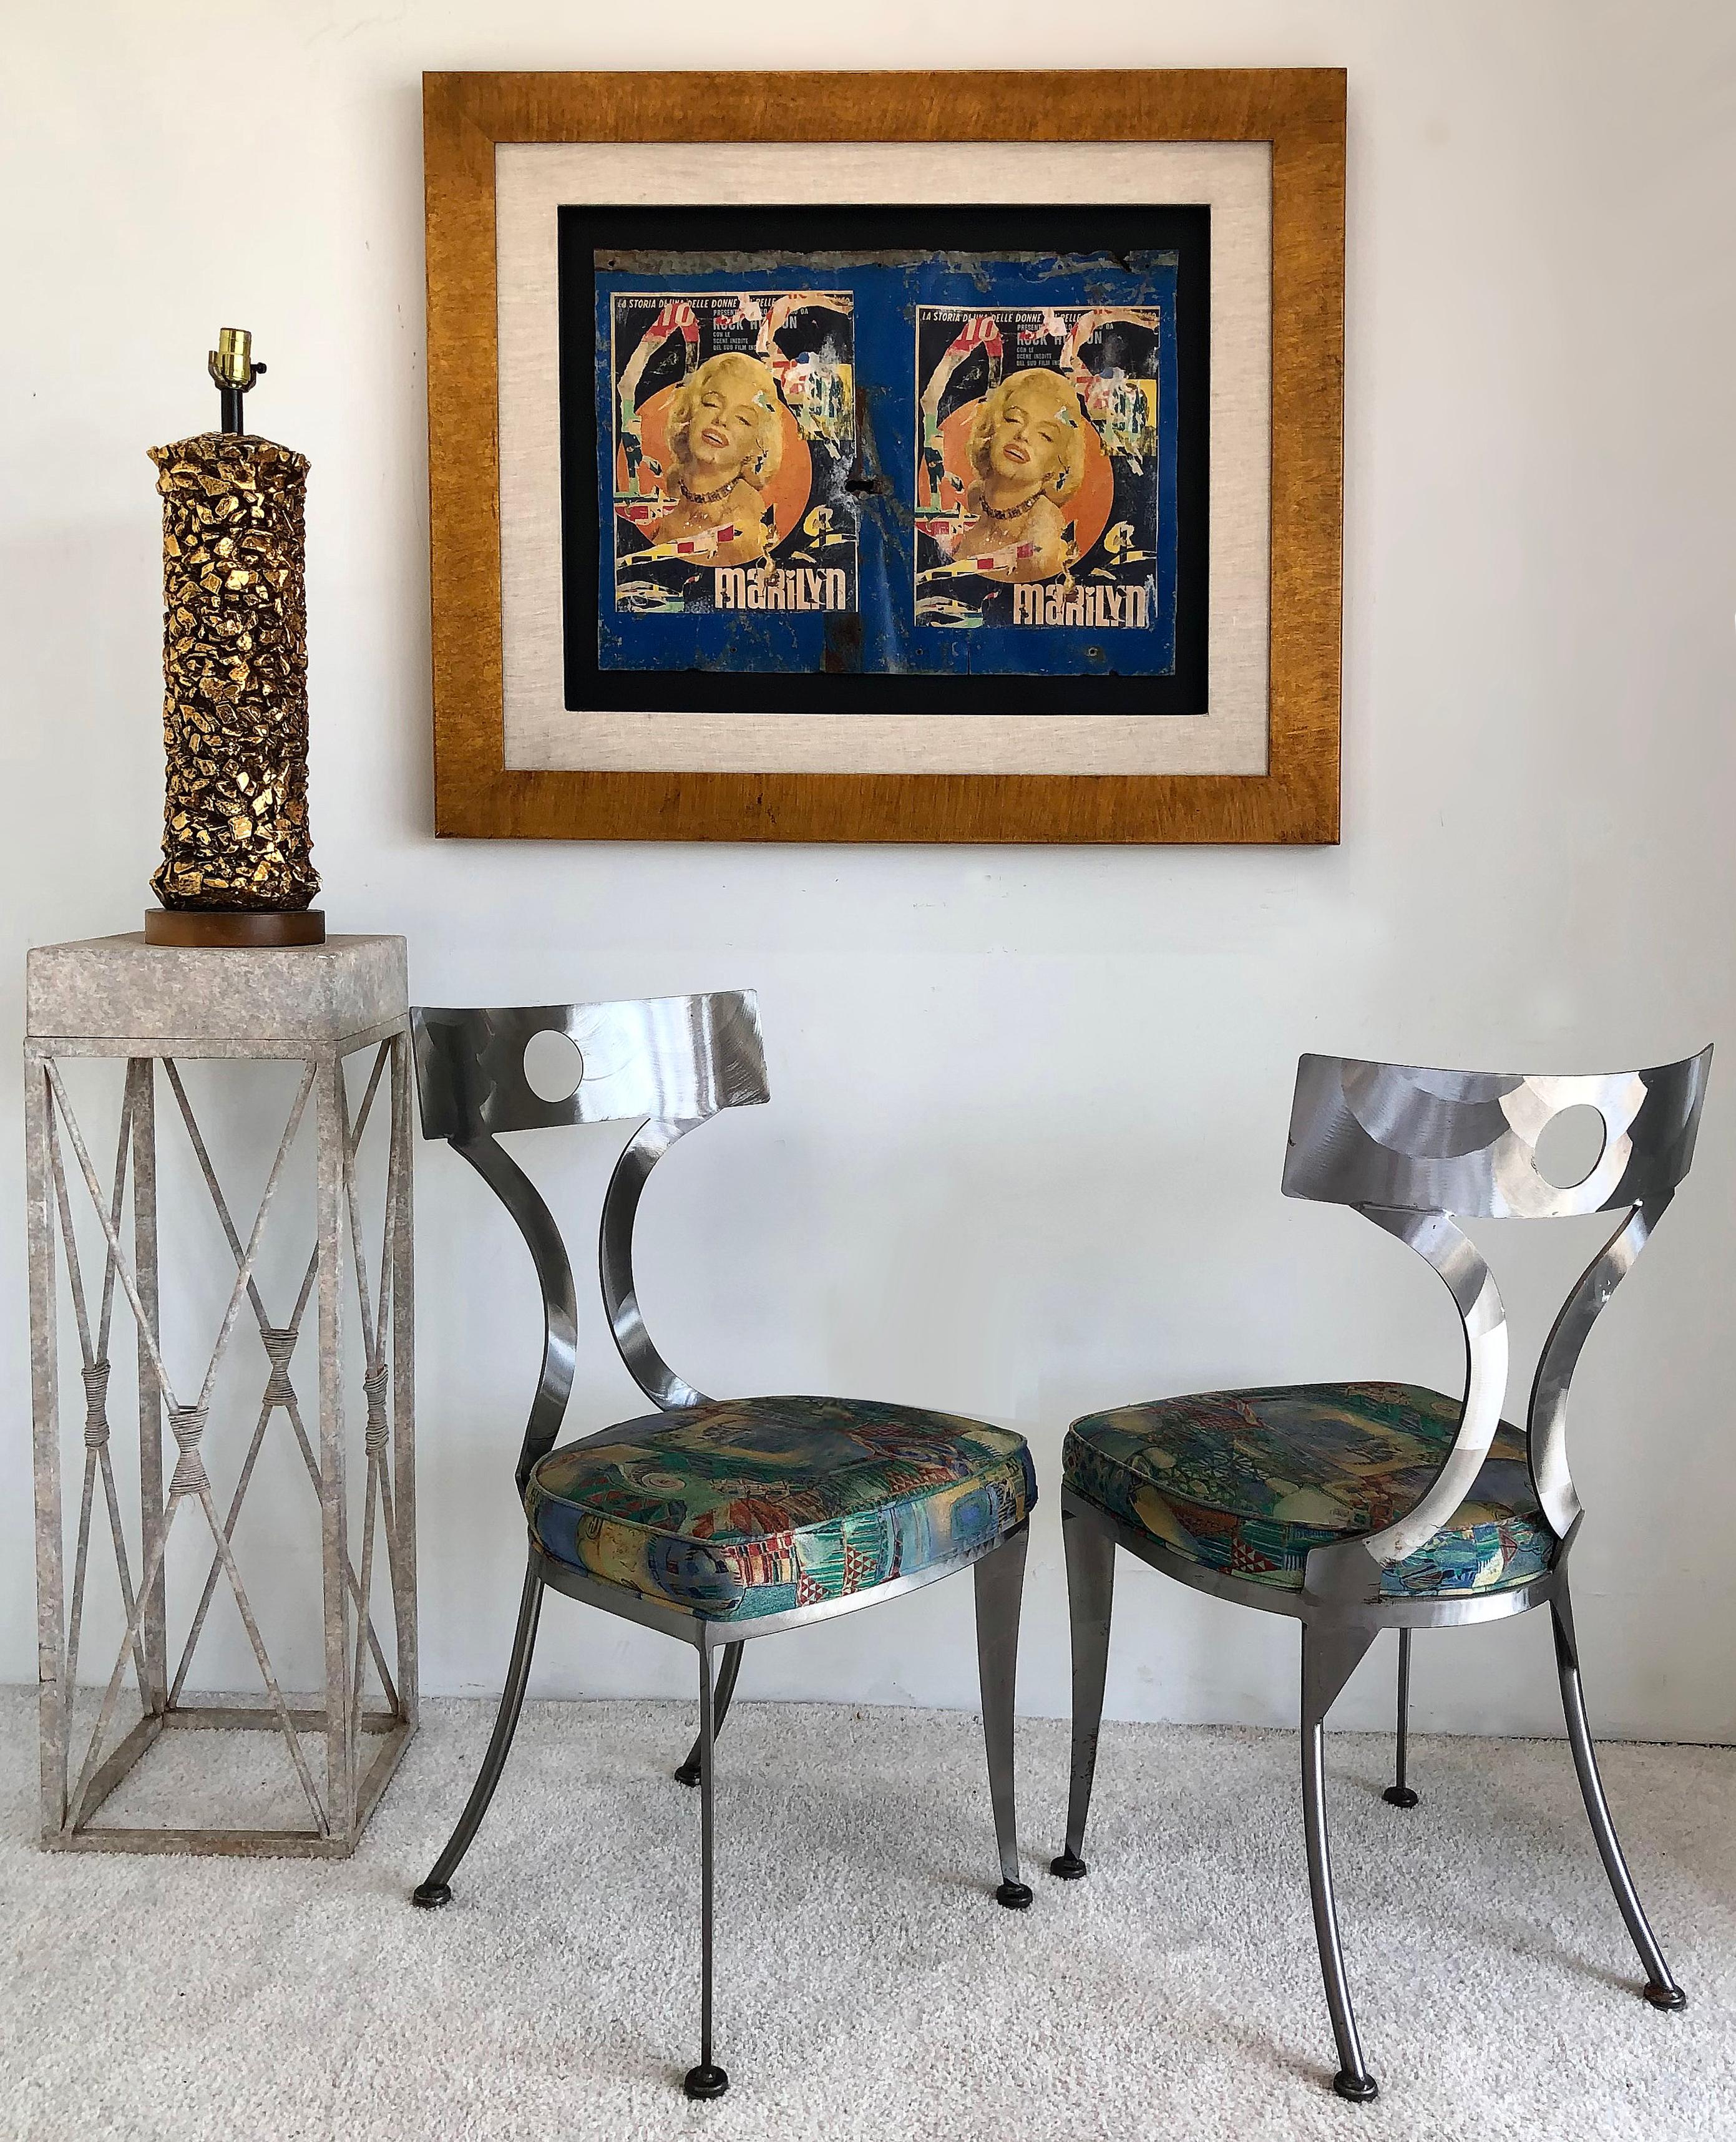 Offered for sale is a stunning framed large metal installation after the Iconic Italian artist Mimmo Rotella. The work depicts Italian street Pop Art with the sex symbol Marilyn Monroe displayed within a wonderful gold leaf frame. The Monroe posters